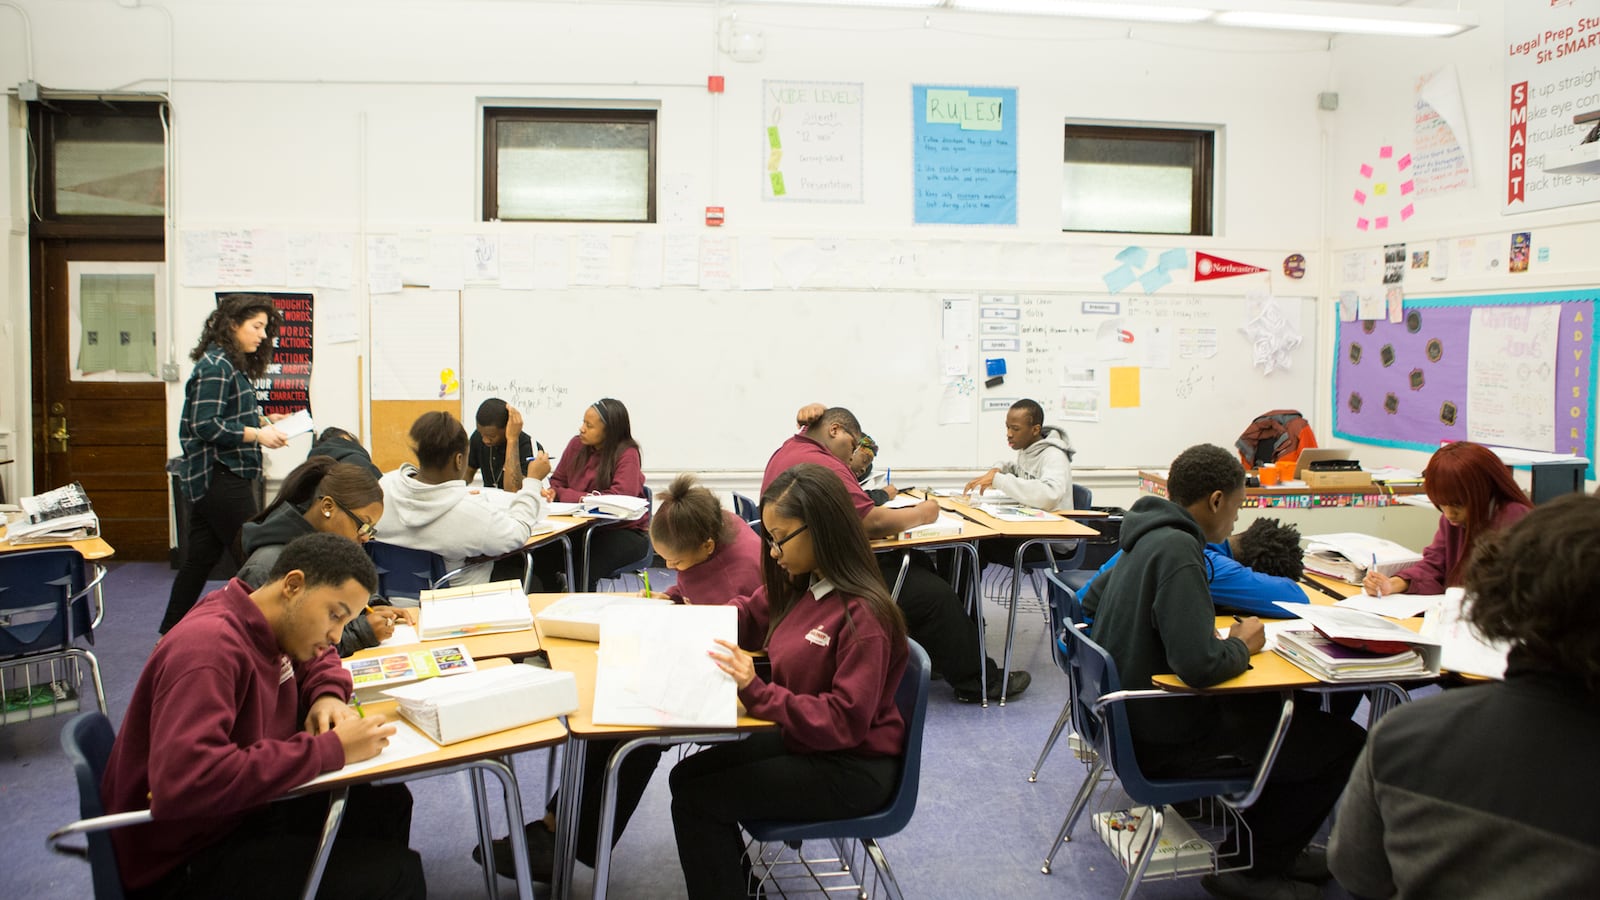 Students work at their desks in a classroom, all wearing maroon school uniforms.